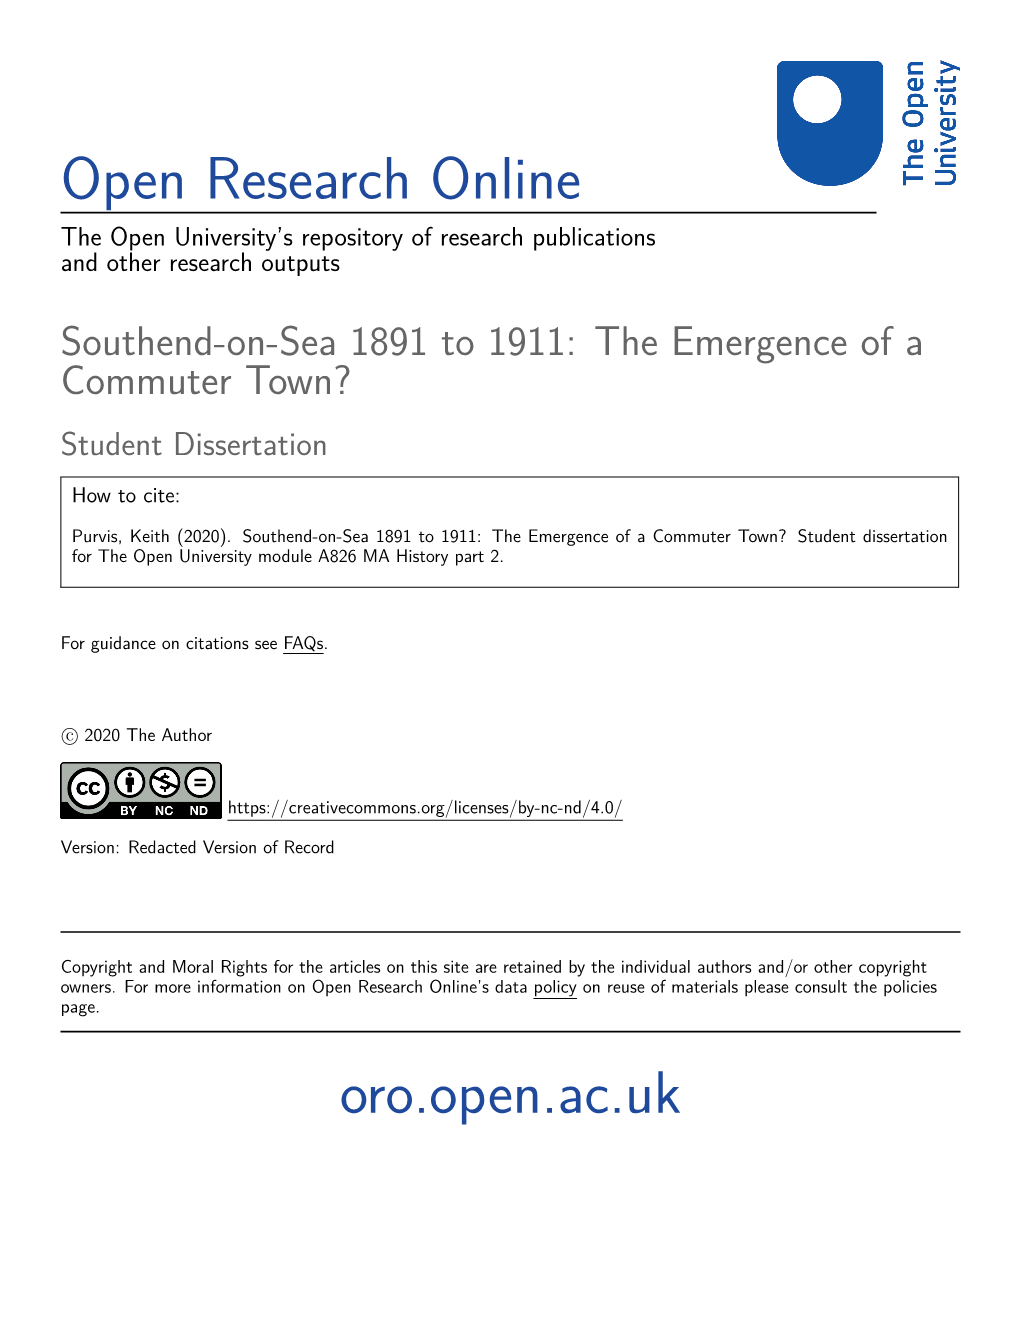 Southend-On-Sea 1891 to 1911: the Emergence of a Commuter Town? Student Dissertation